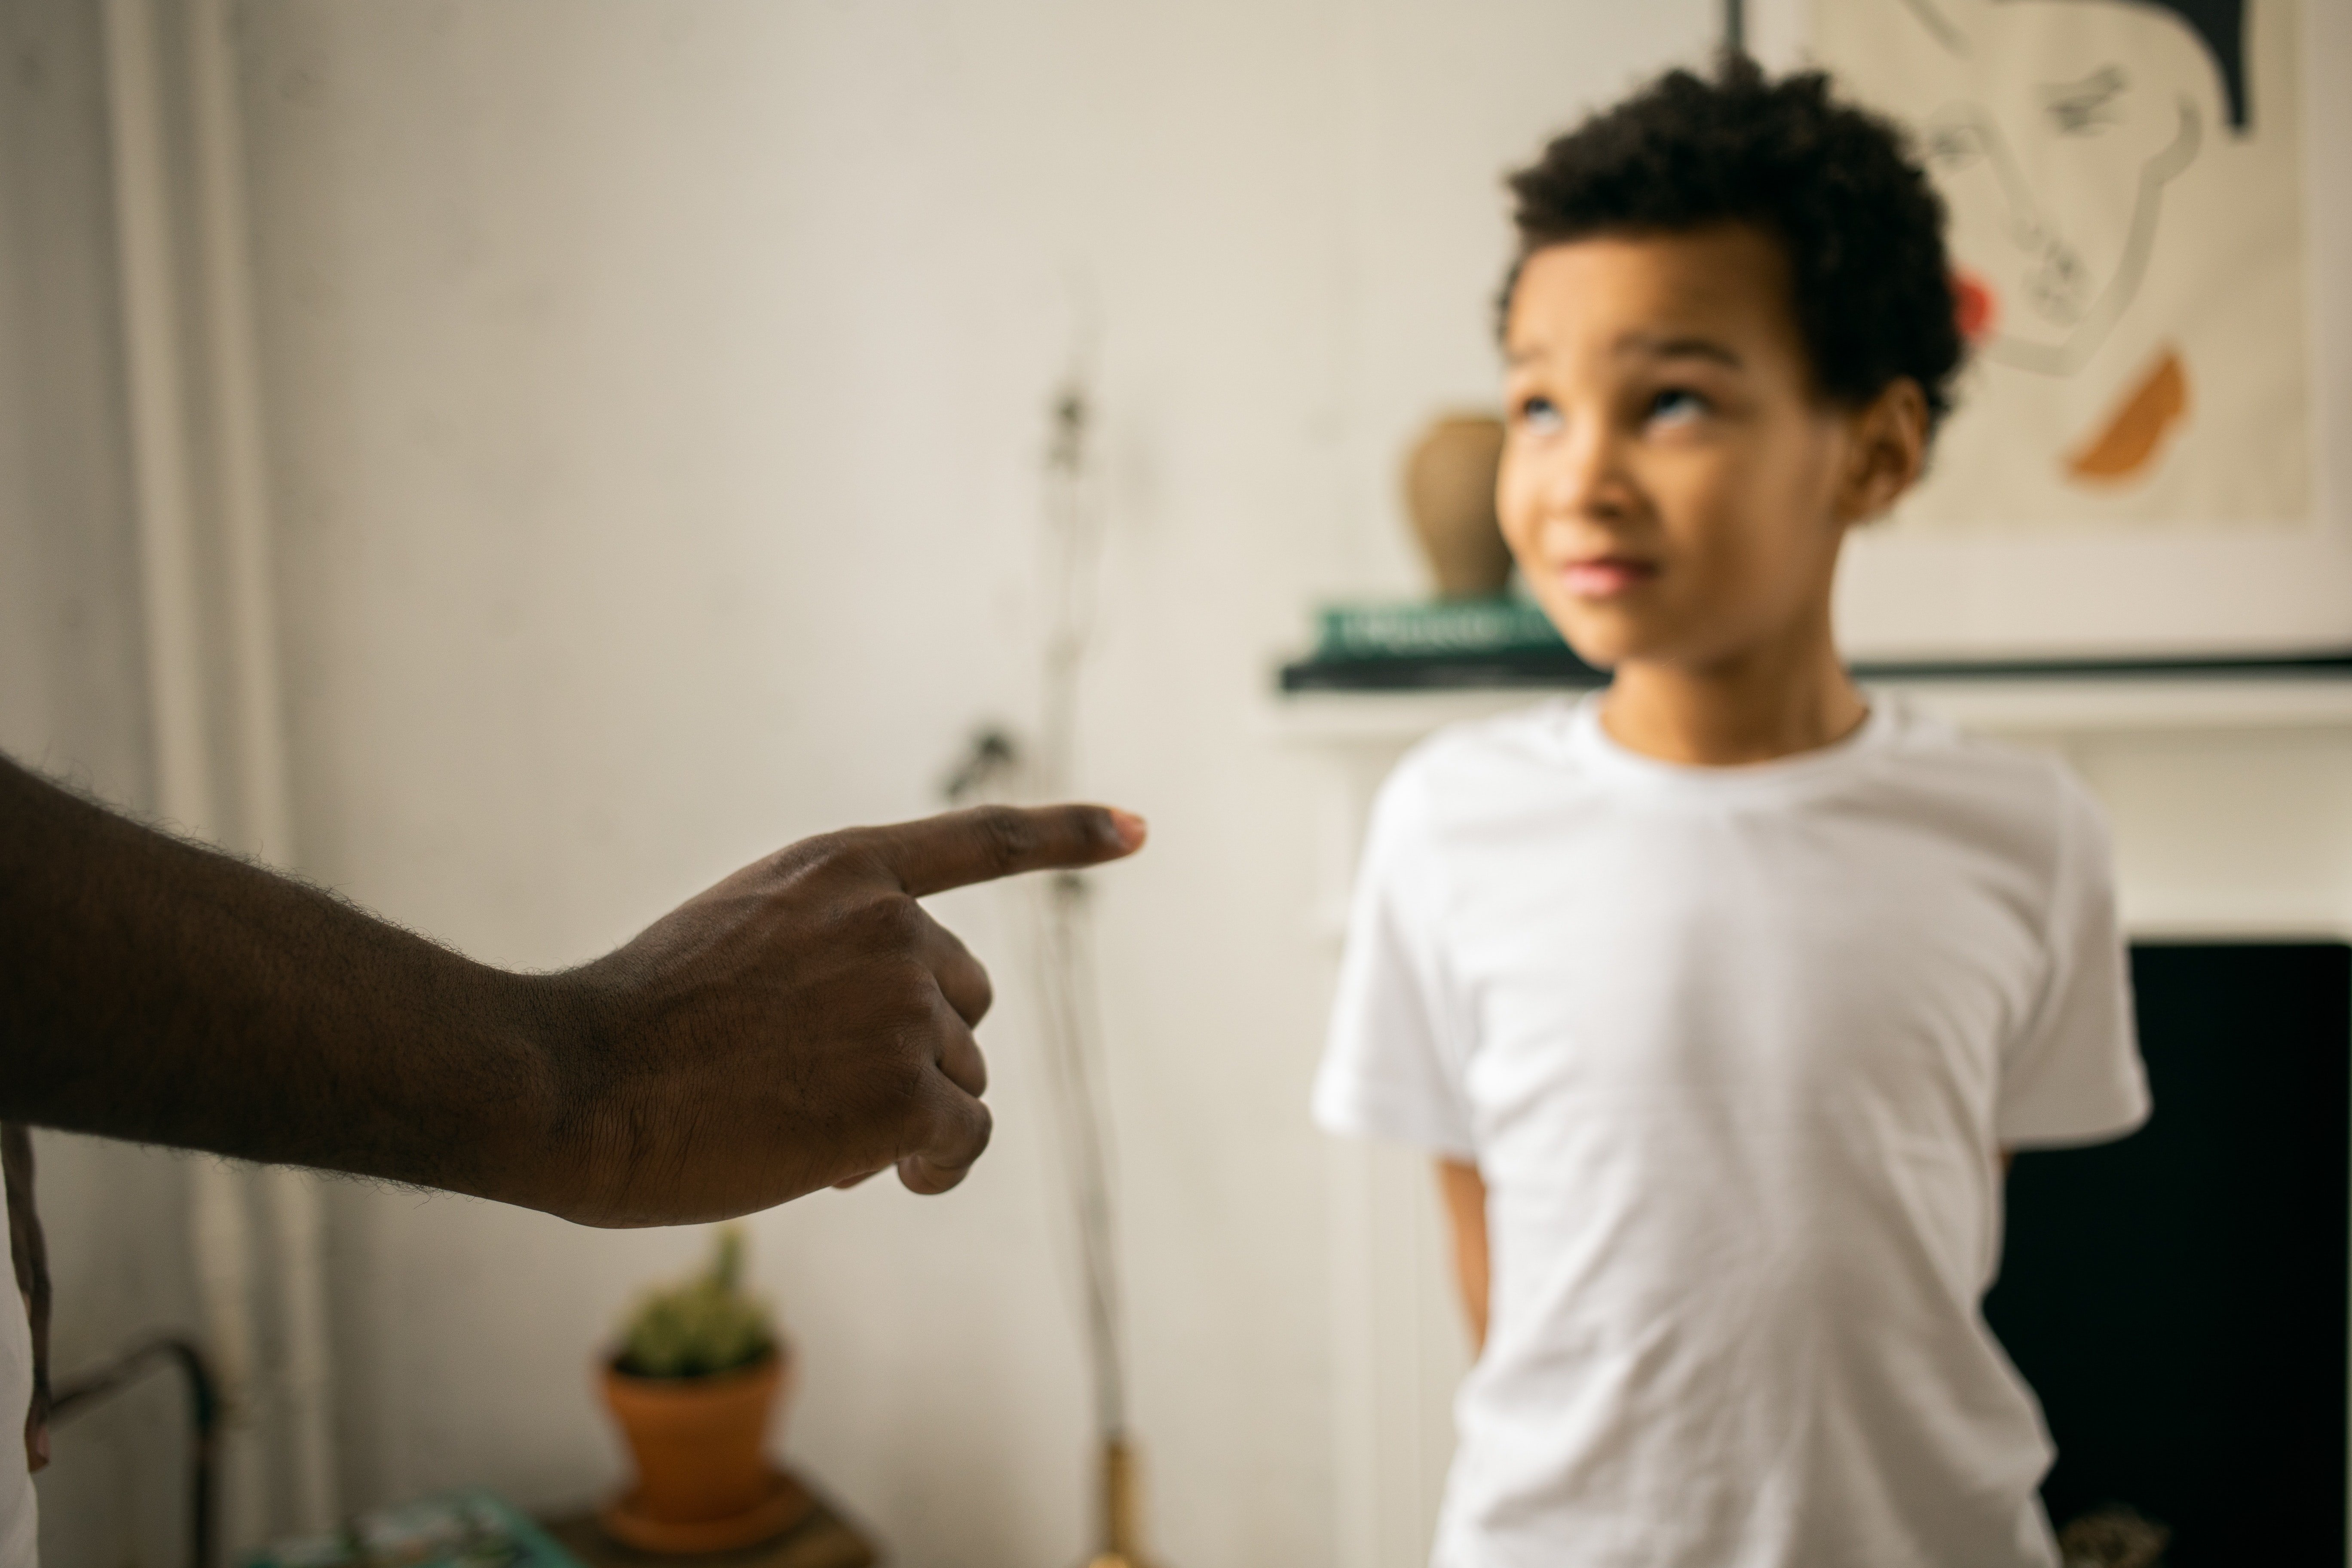 Aiden requested his dad for money | Photo: Unsplash